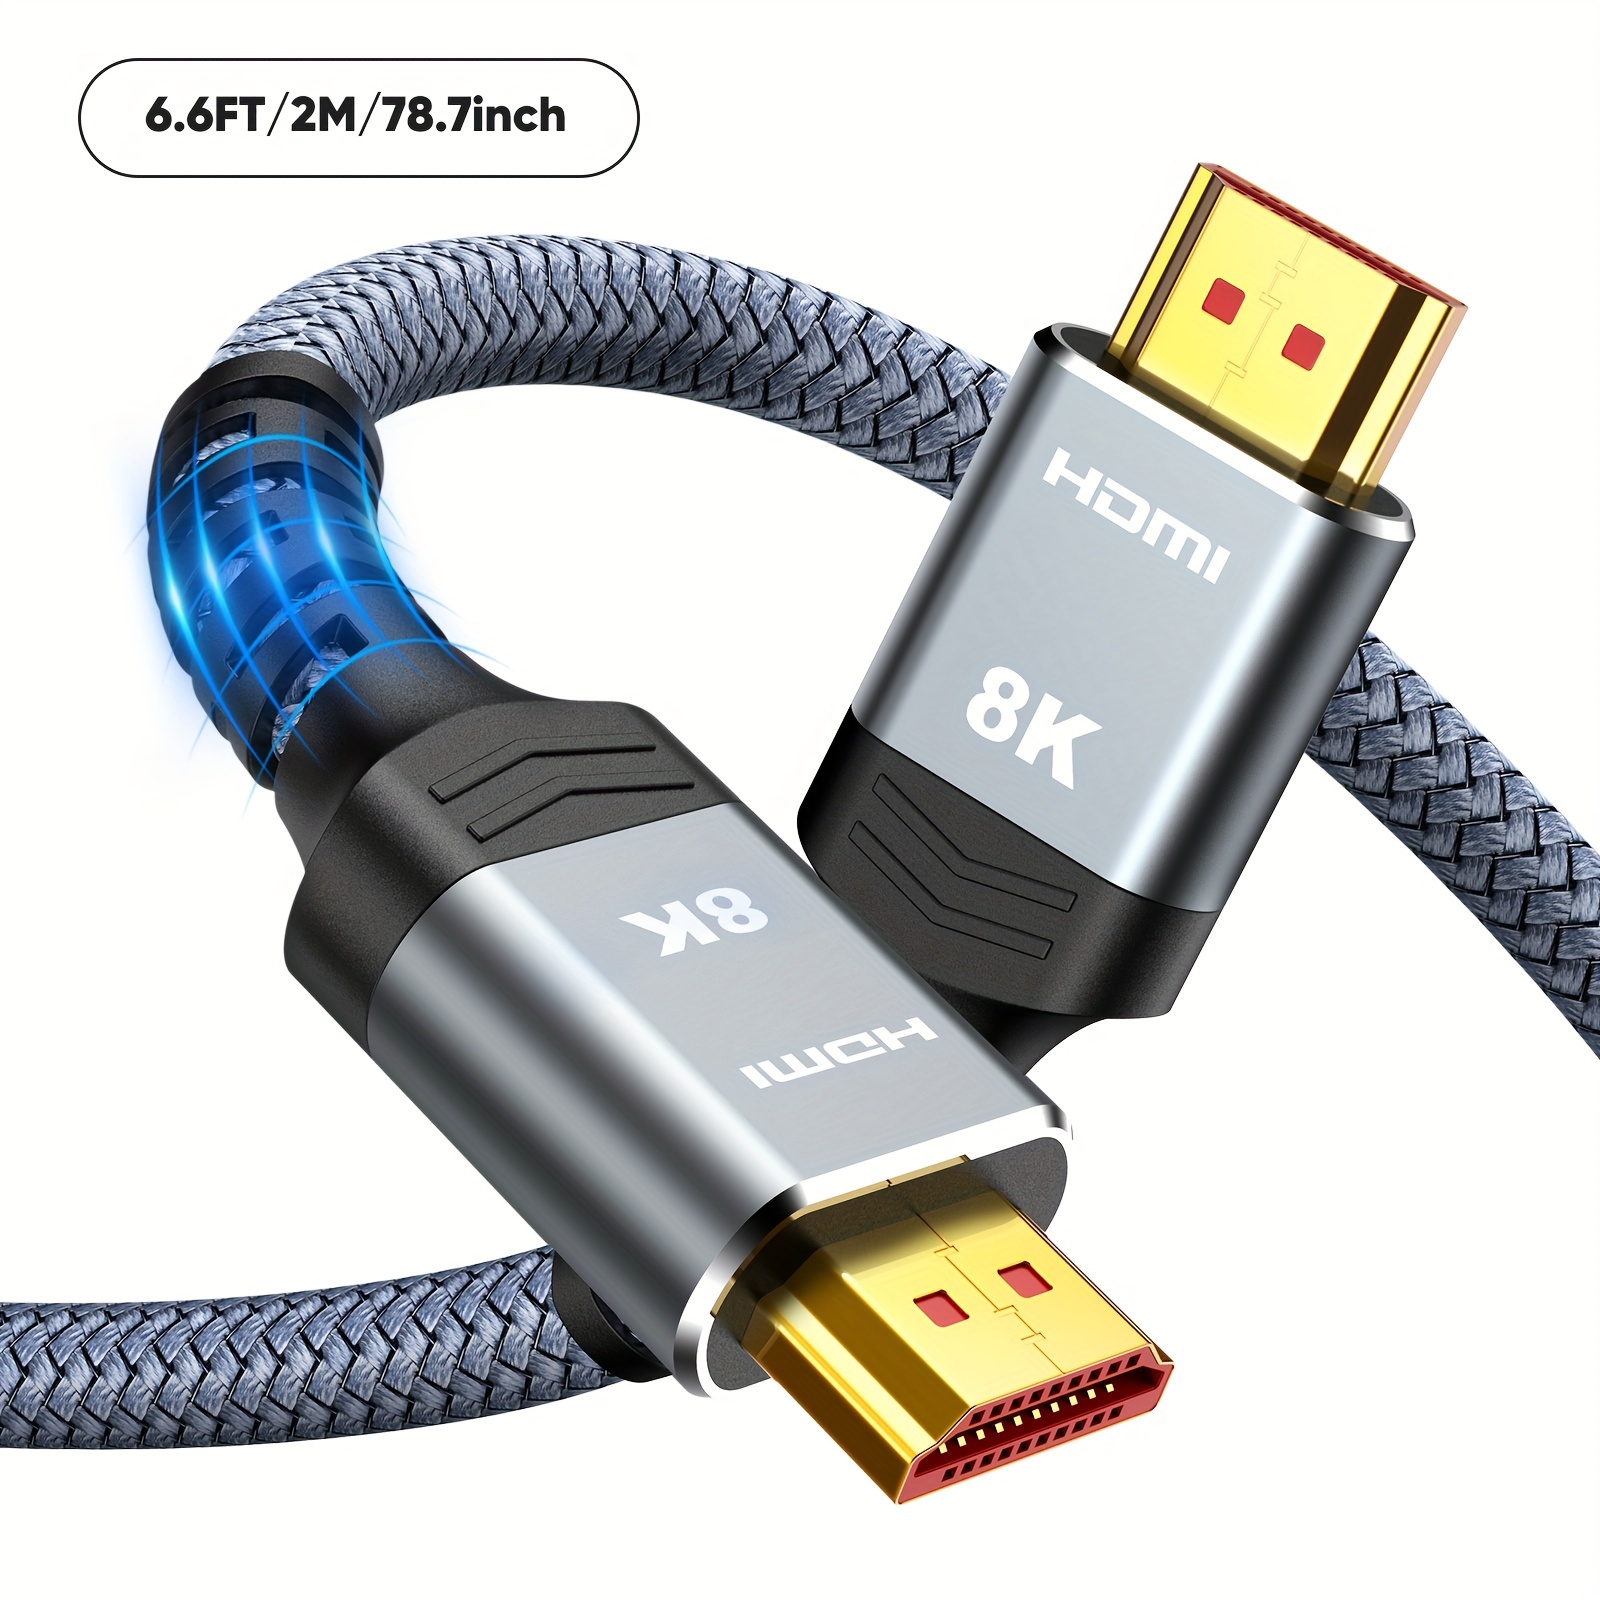 Cable USB a HDMI Cable USB 6.6 – 1.6 ft/1.64 pies Cable de cargador Divisor  HDMI a USB Cable HDMI 2.0 Cable de carga Cable HDMI – Cable USB de